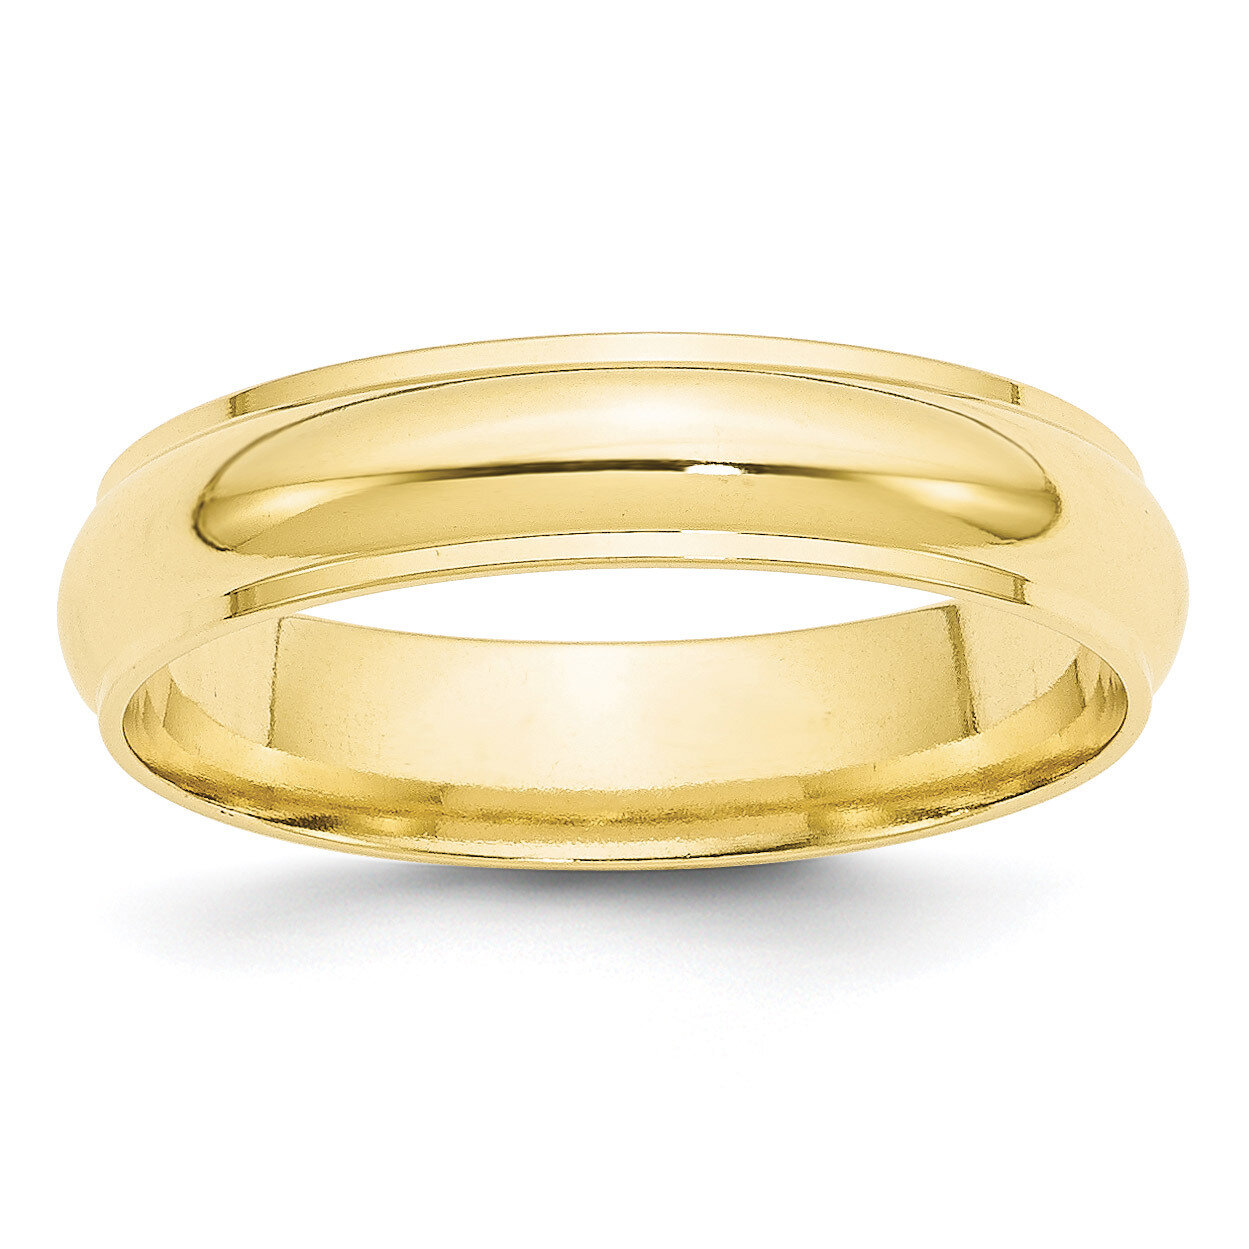 5mm Half Round with Edge Band 10k Yellow Gold 1HRE050 Engravable